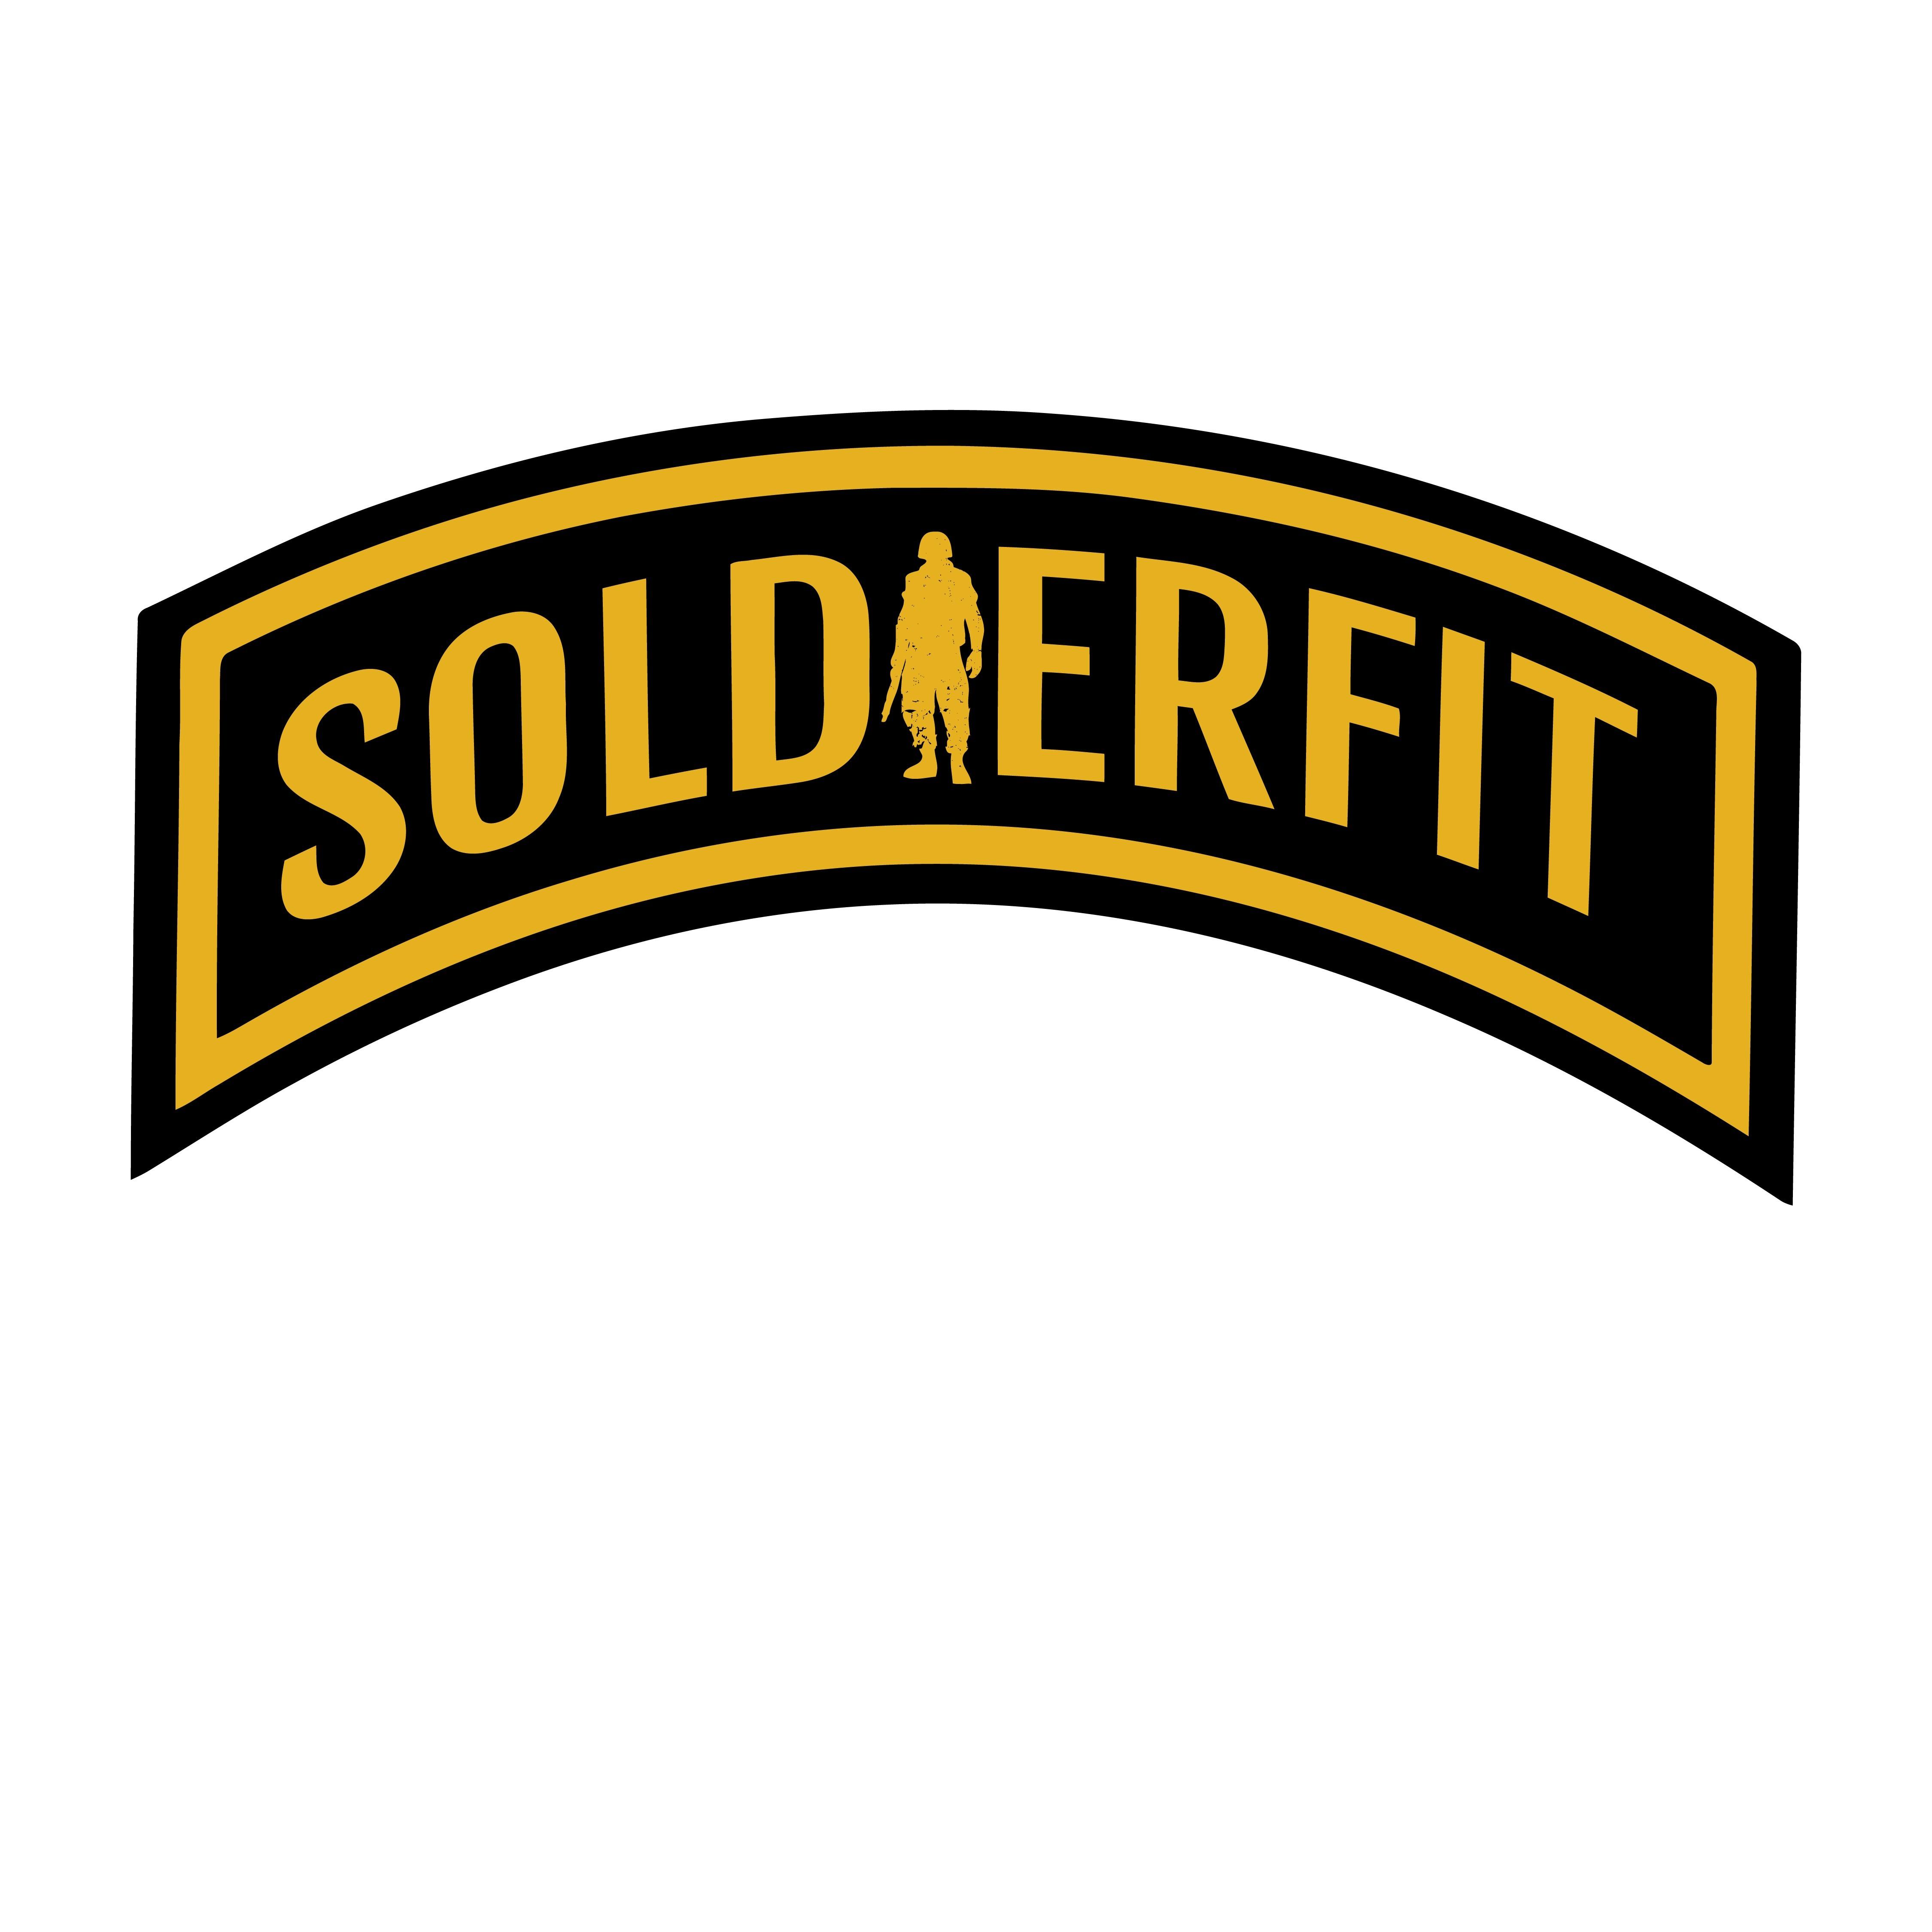 SOLDIERFIT Frederick - Frederick, MD 21701 - (240)457-4630 | ShowMeLocal.com